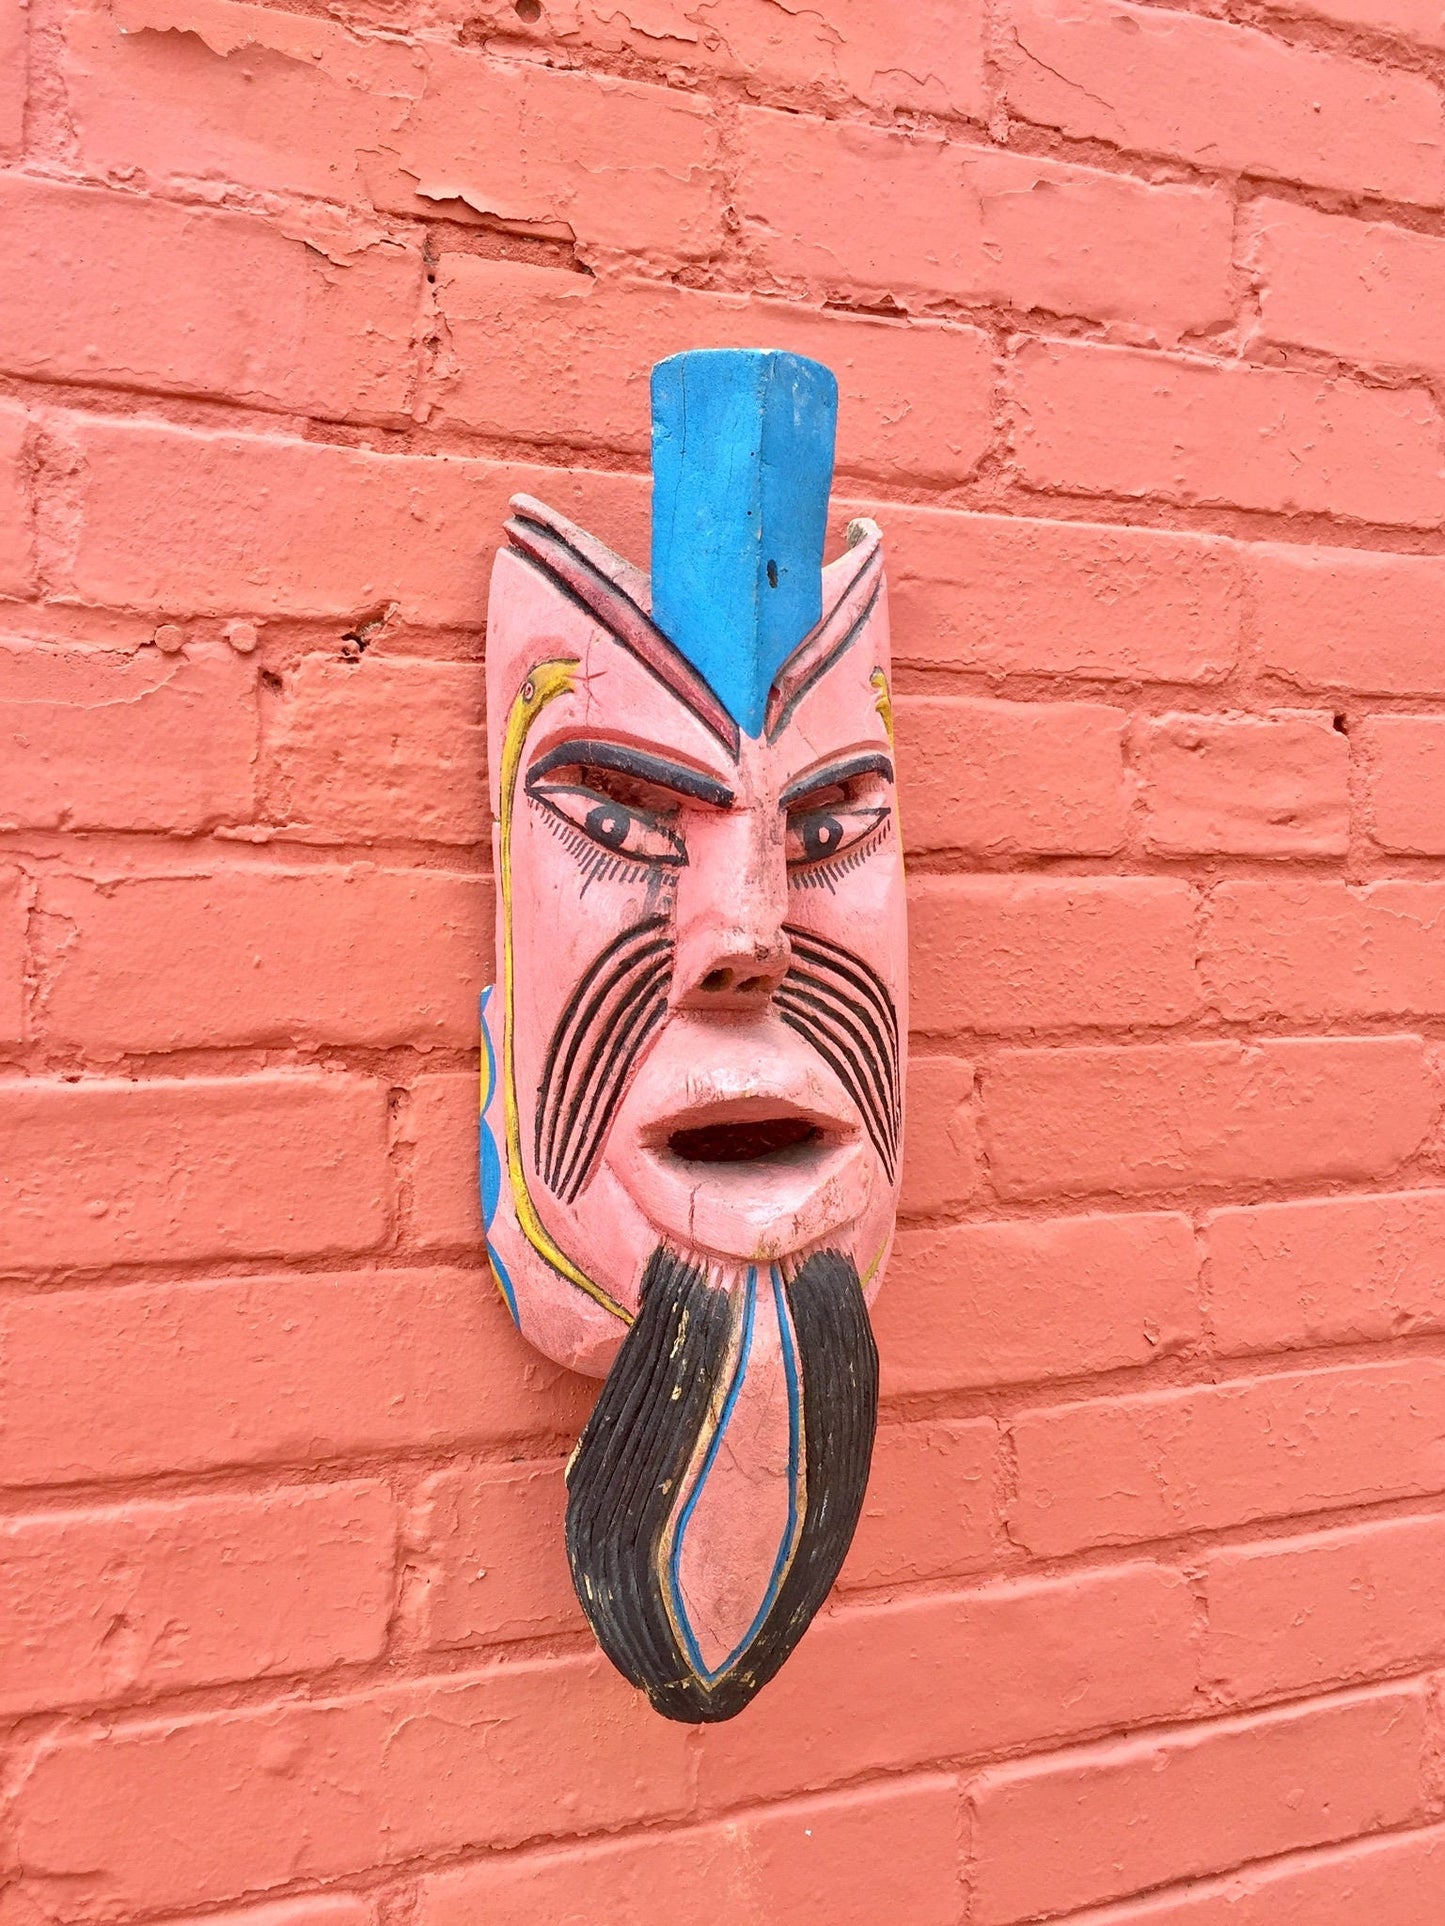 Colorful wooden mask with geometric designs hanging on a textured red brick wall.